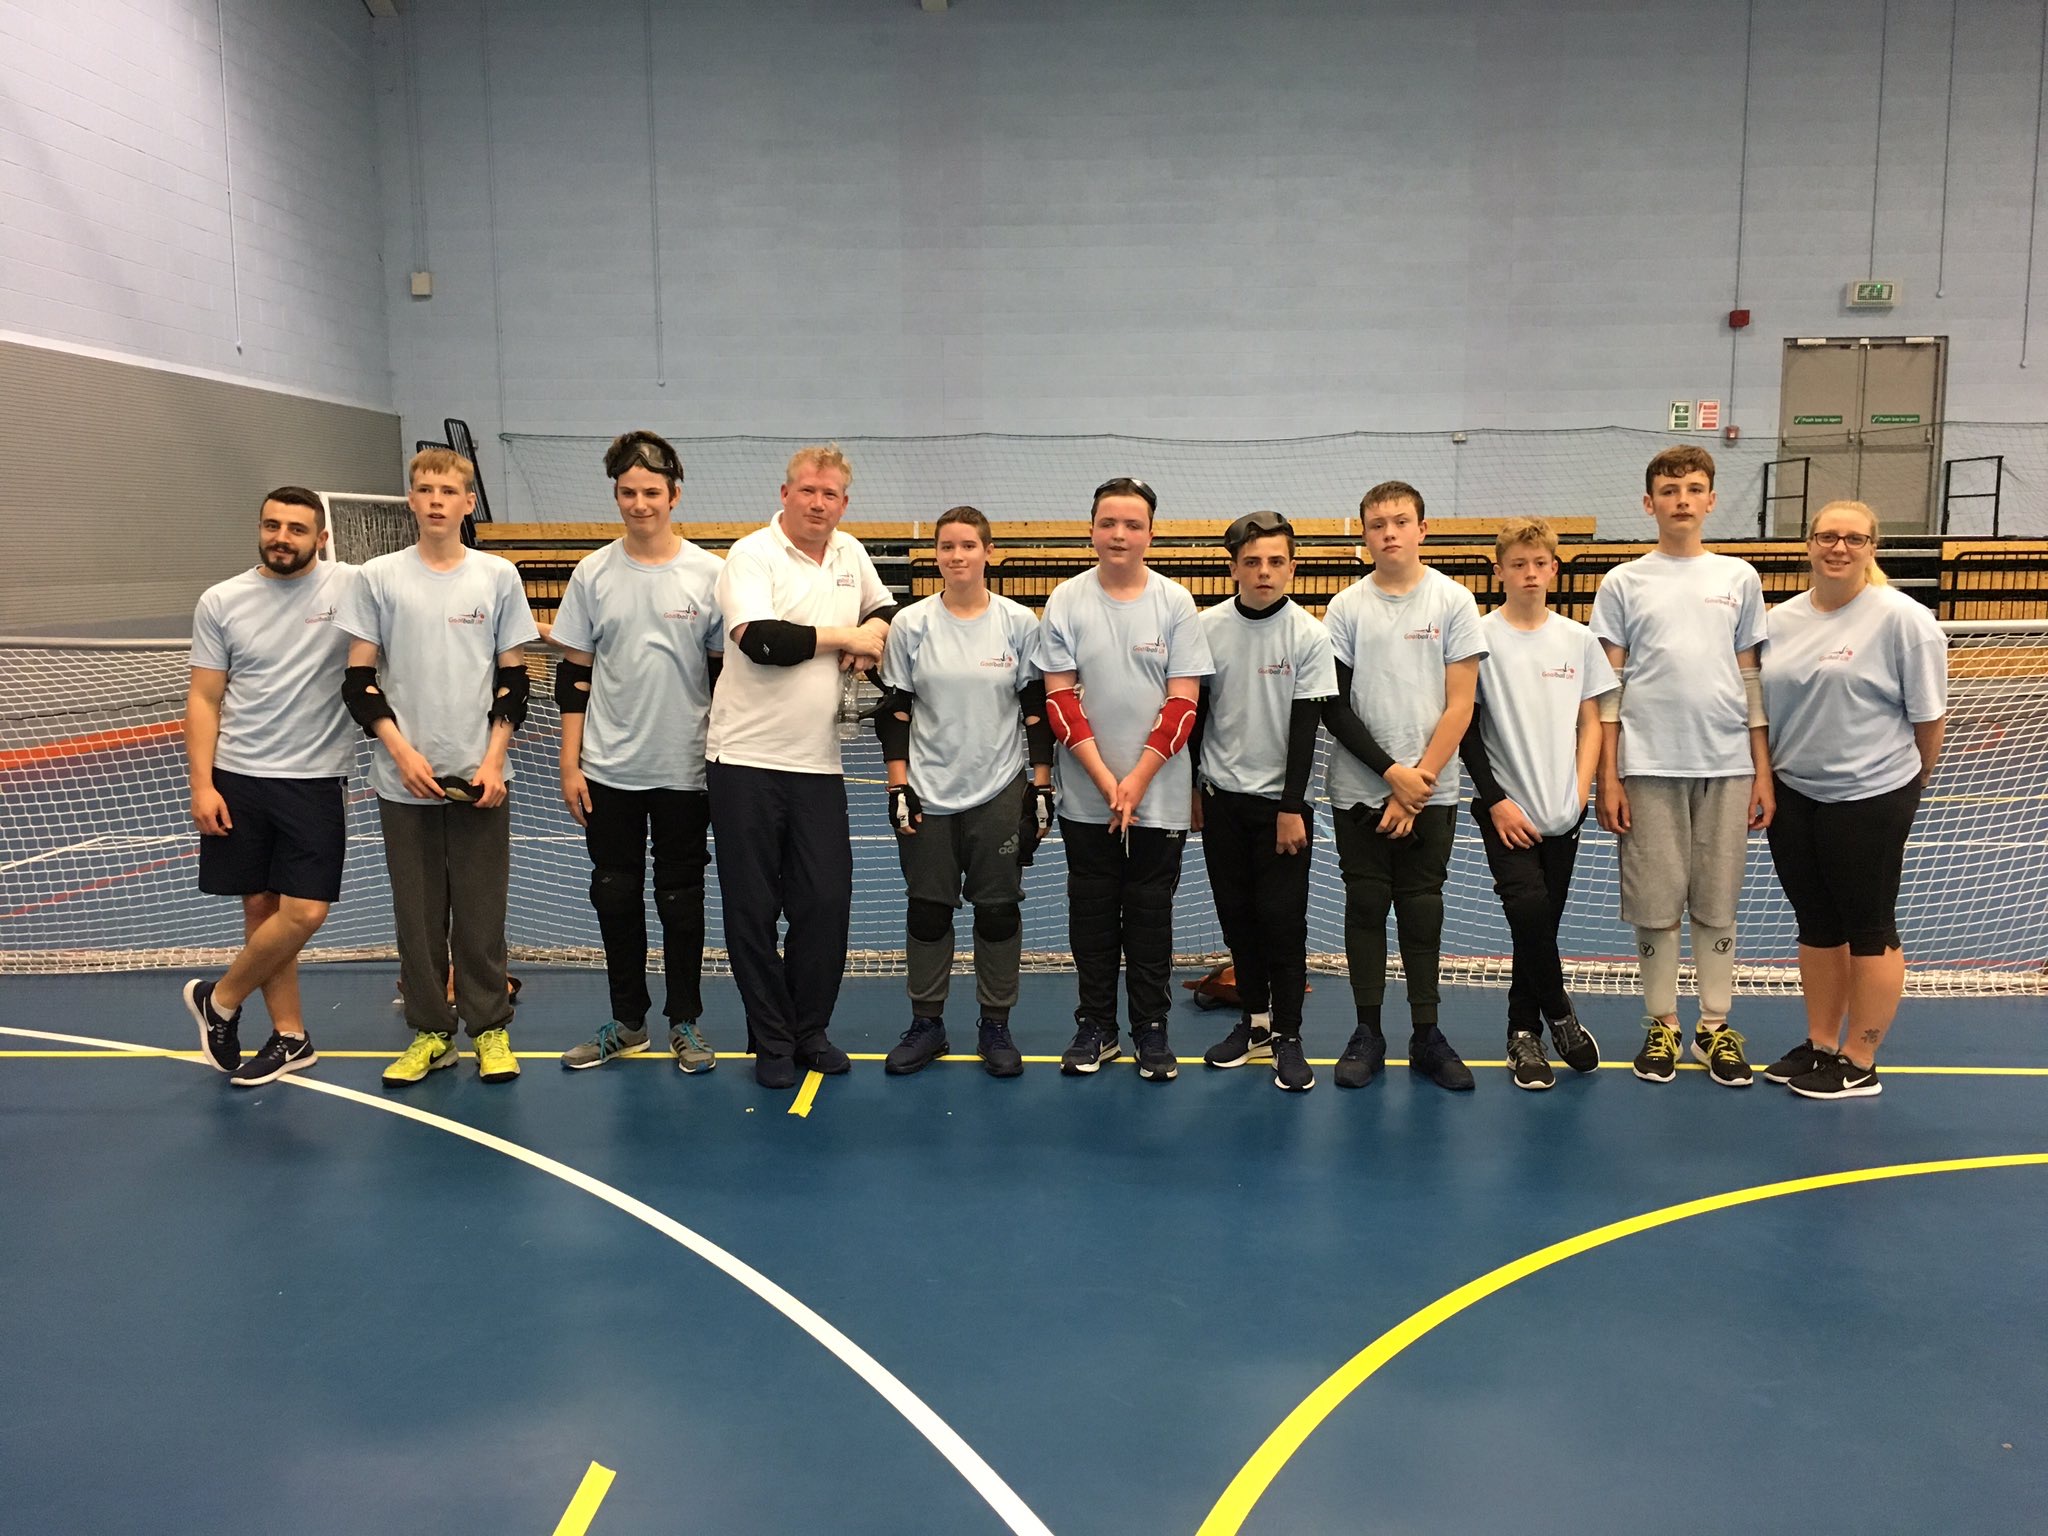 Mark winder stood with the attendees of the 2017 goalball summer camp